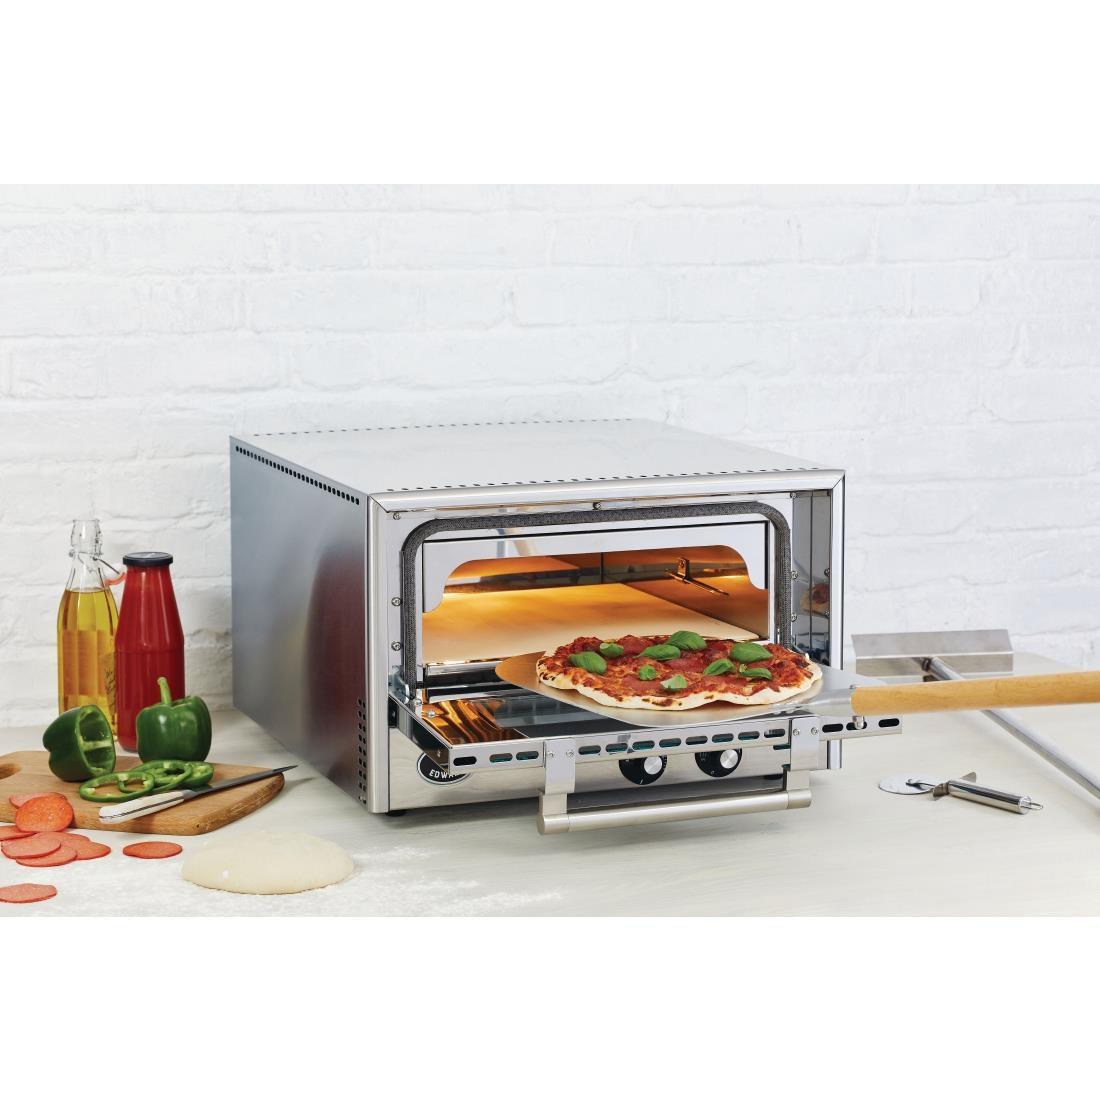 King Edward Colore Pizza Oven Stainless Steel - FT647  - 4